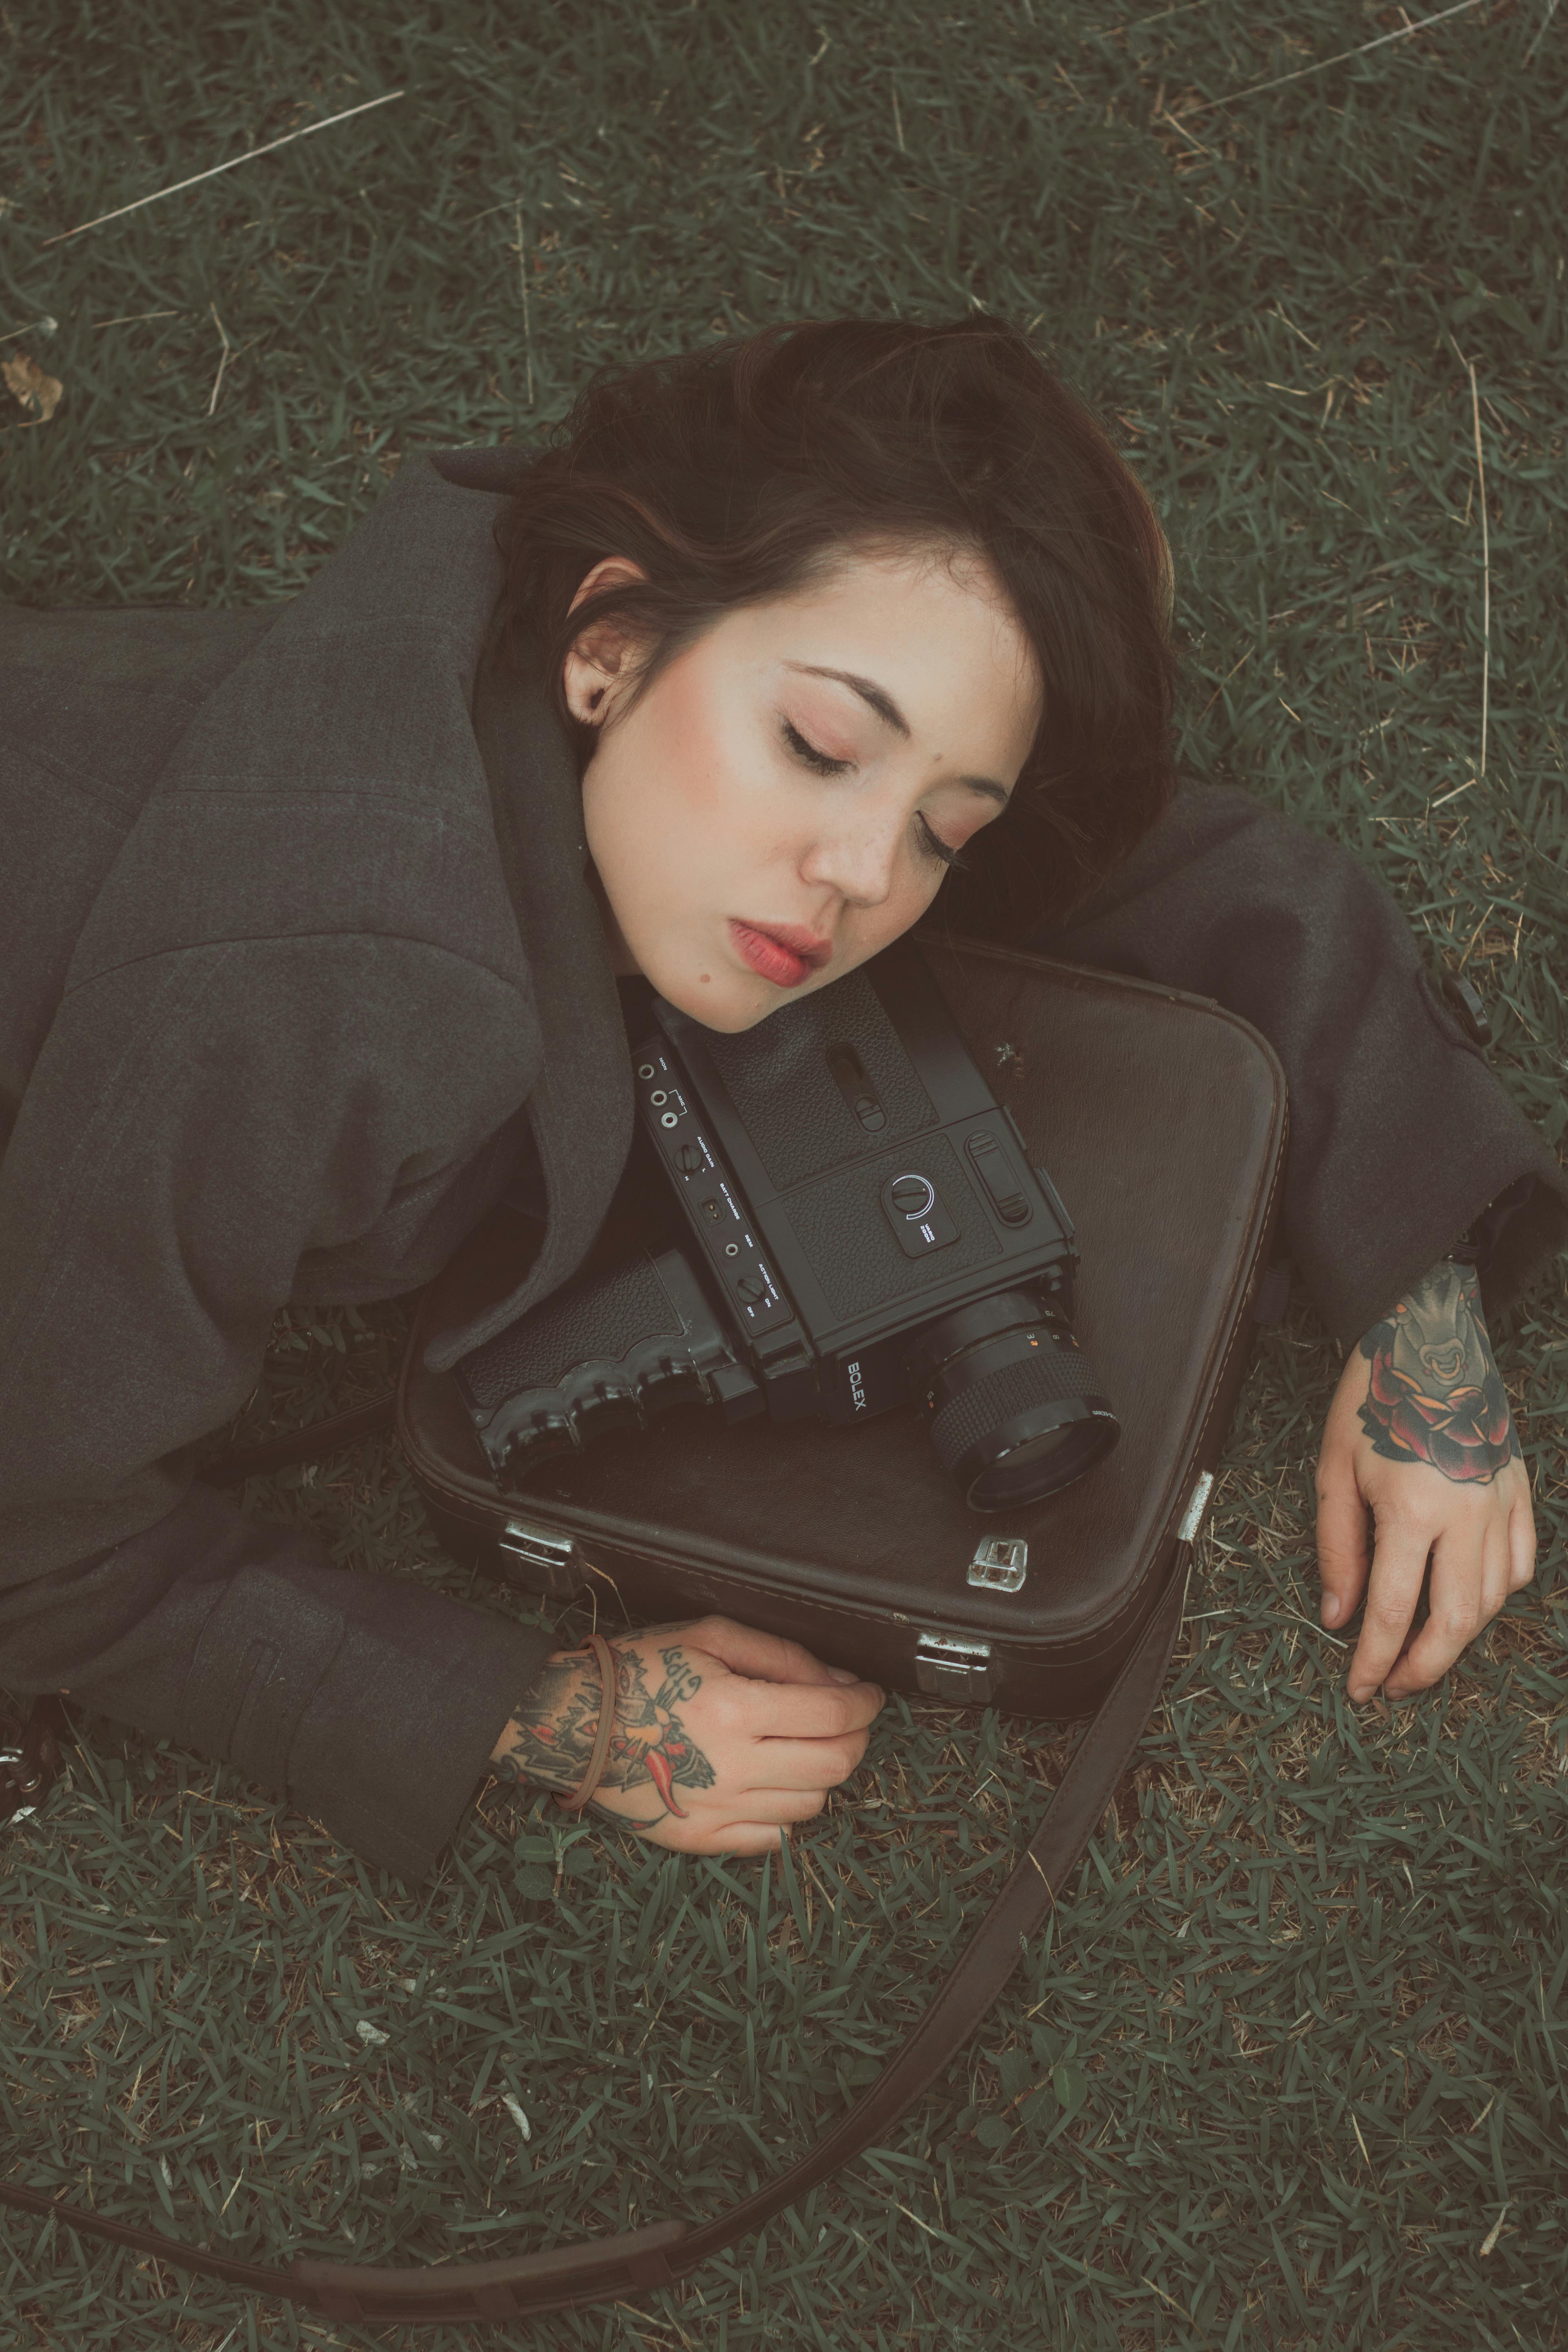 tattooed woman with retro video camera lying on meadow